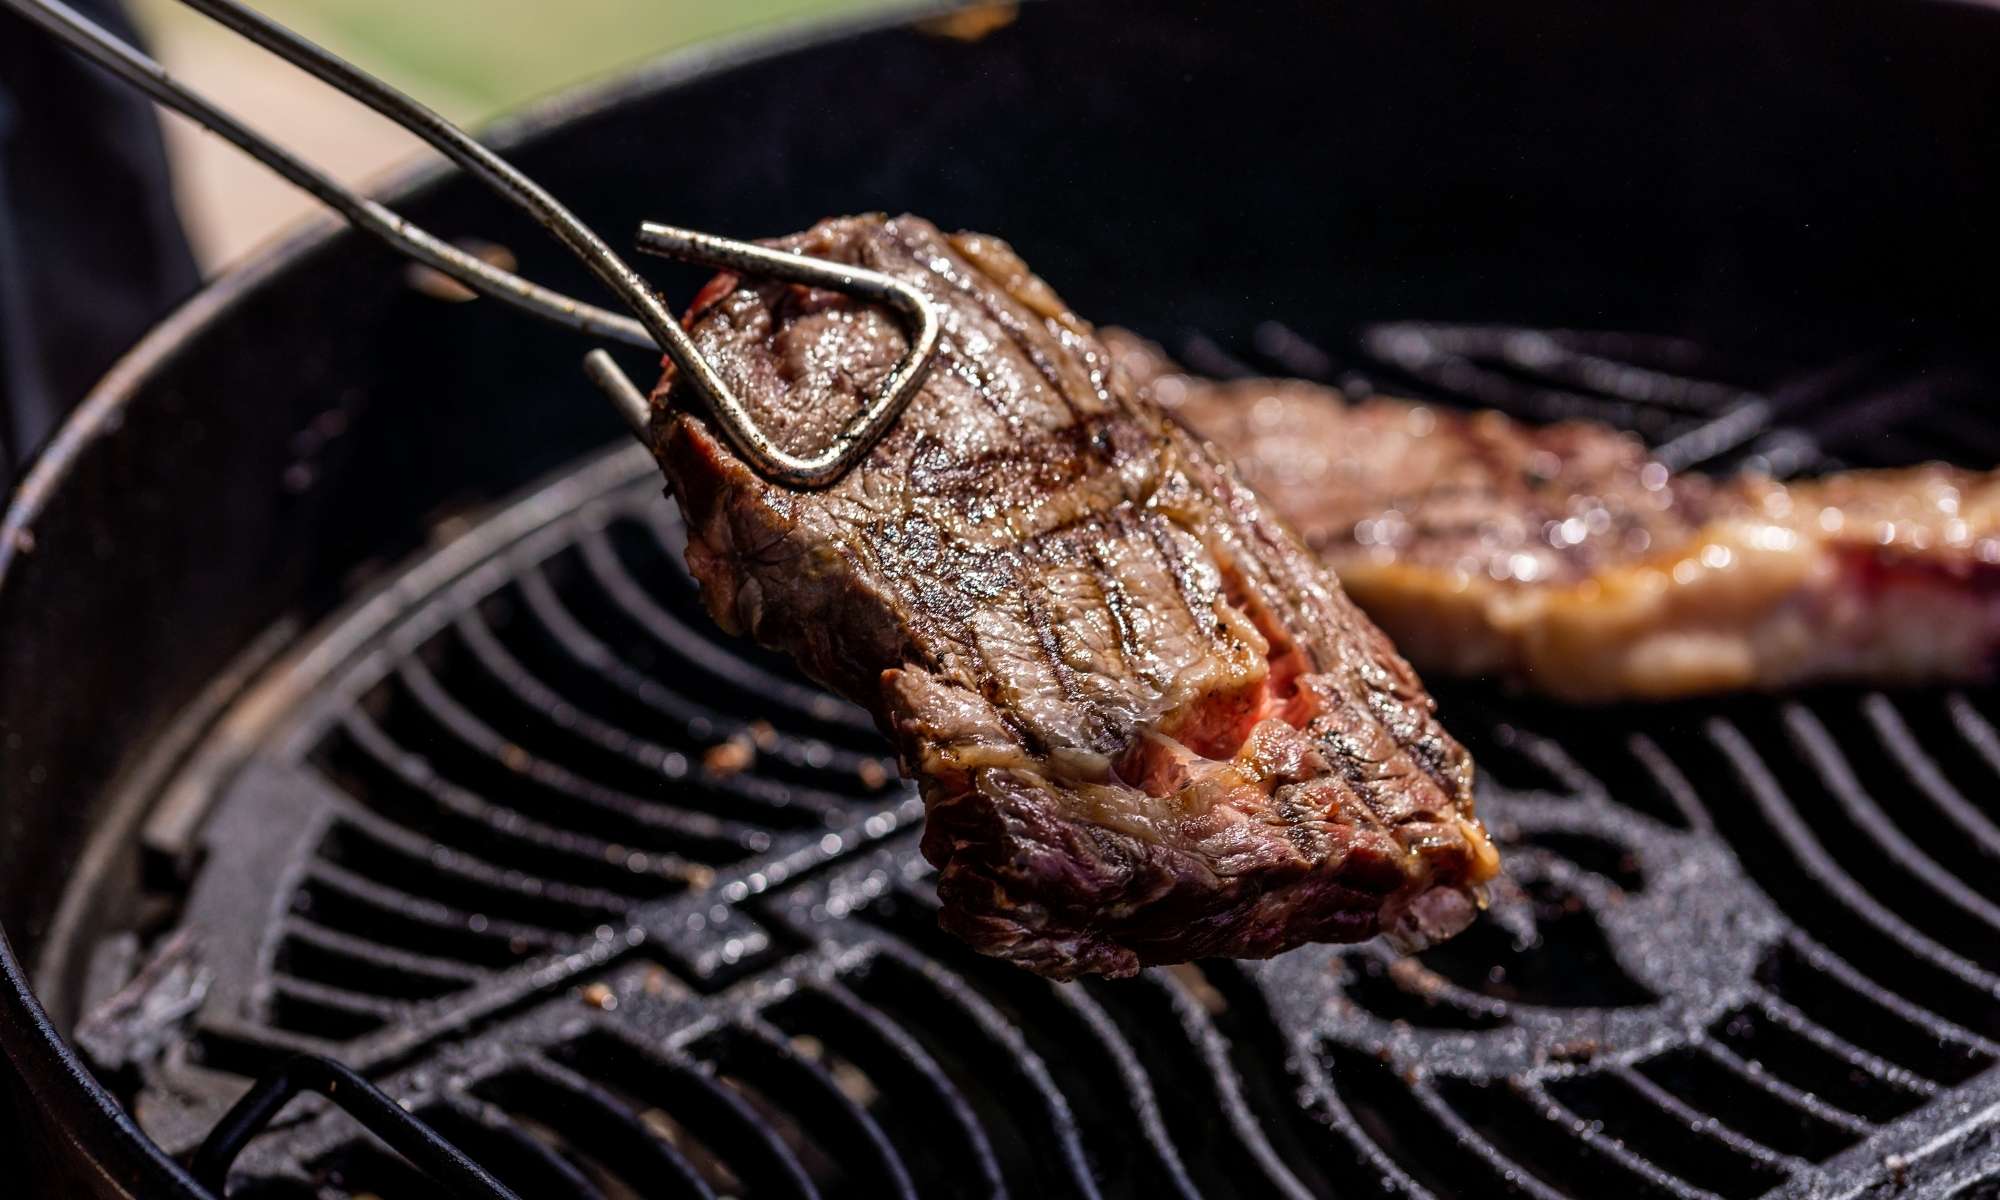 Cook your steak over the grill